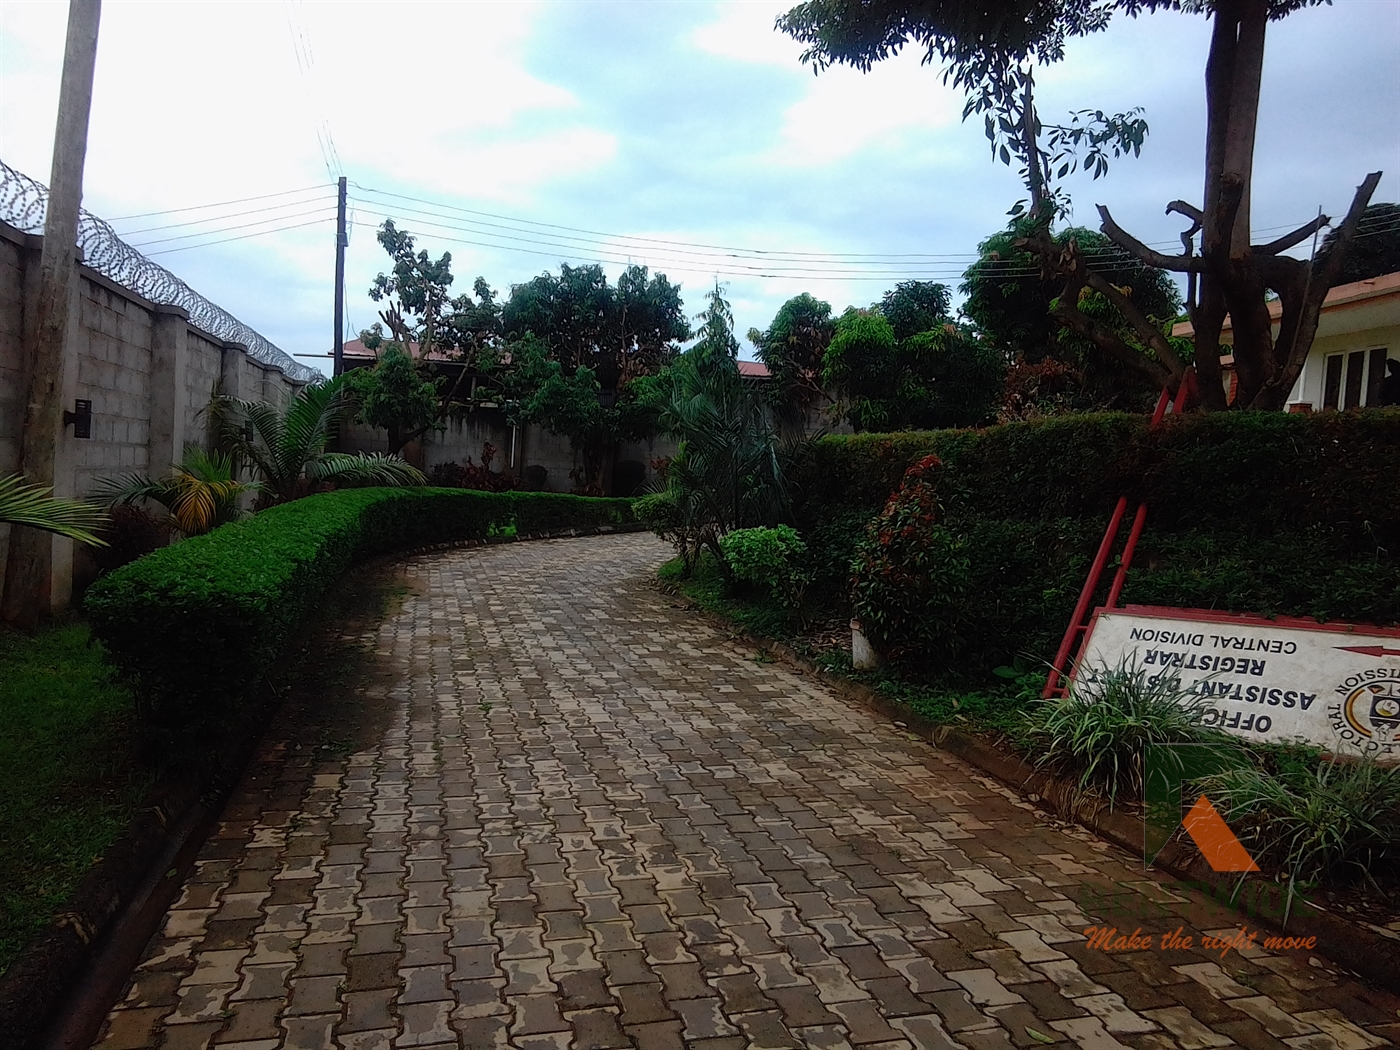 Commercial Land for sale in Kamwokya Kampala